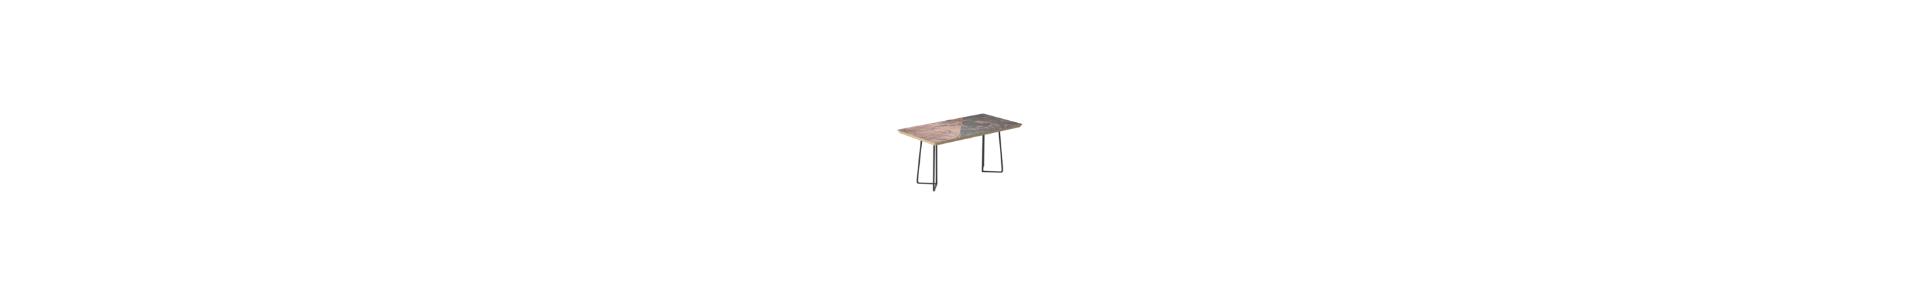 Marble and concrete tables